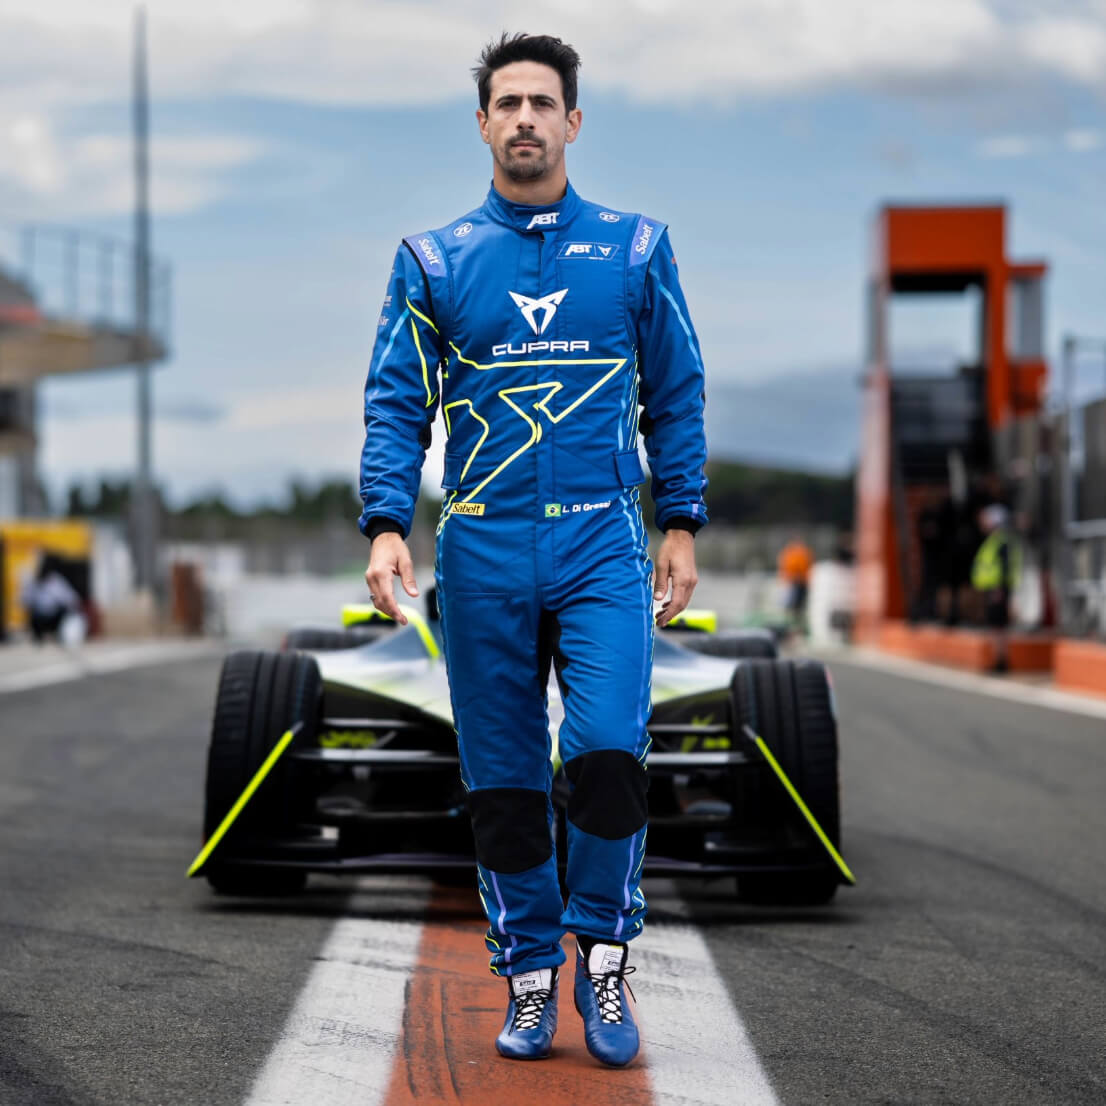 Lucas di Grassi walking on a racetrack in front of a stationary Formula E car